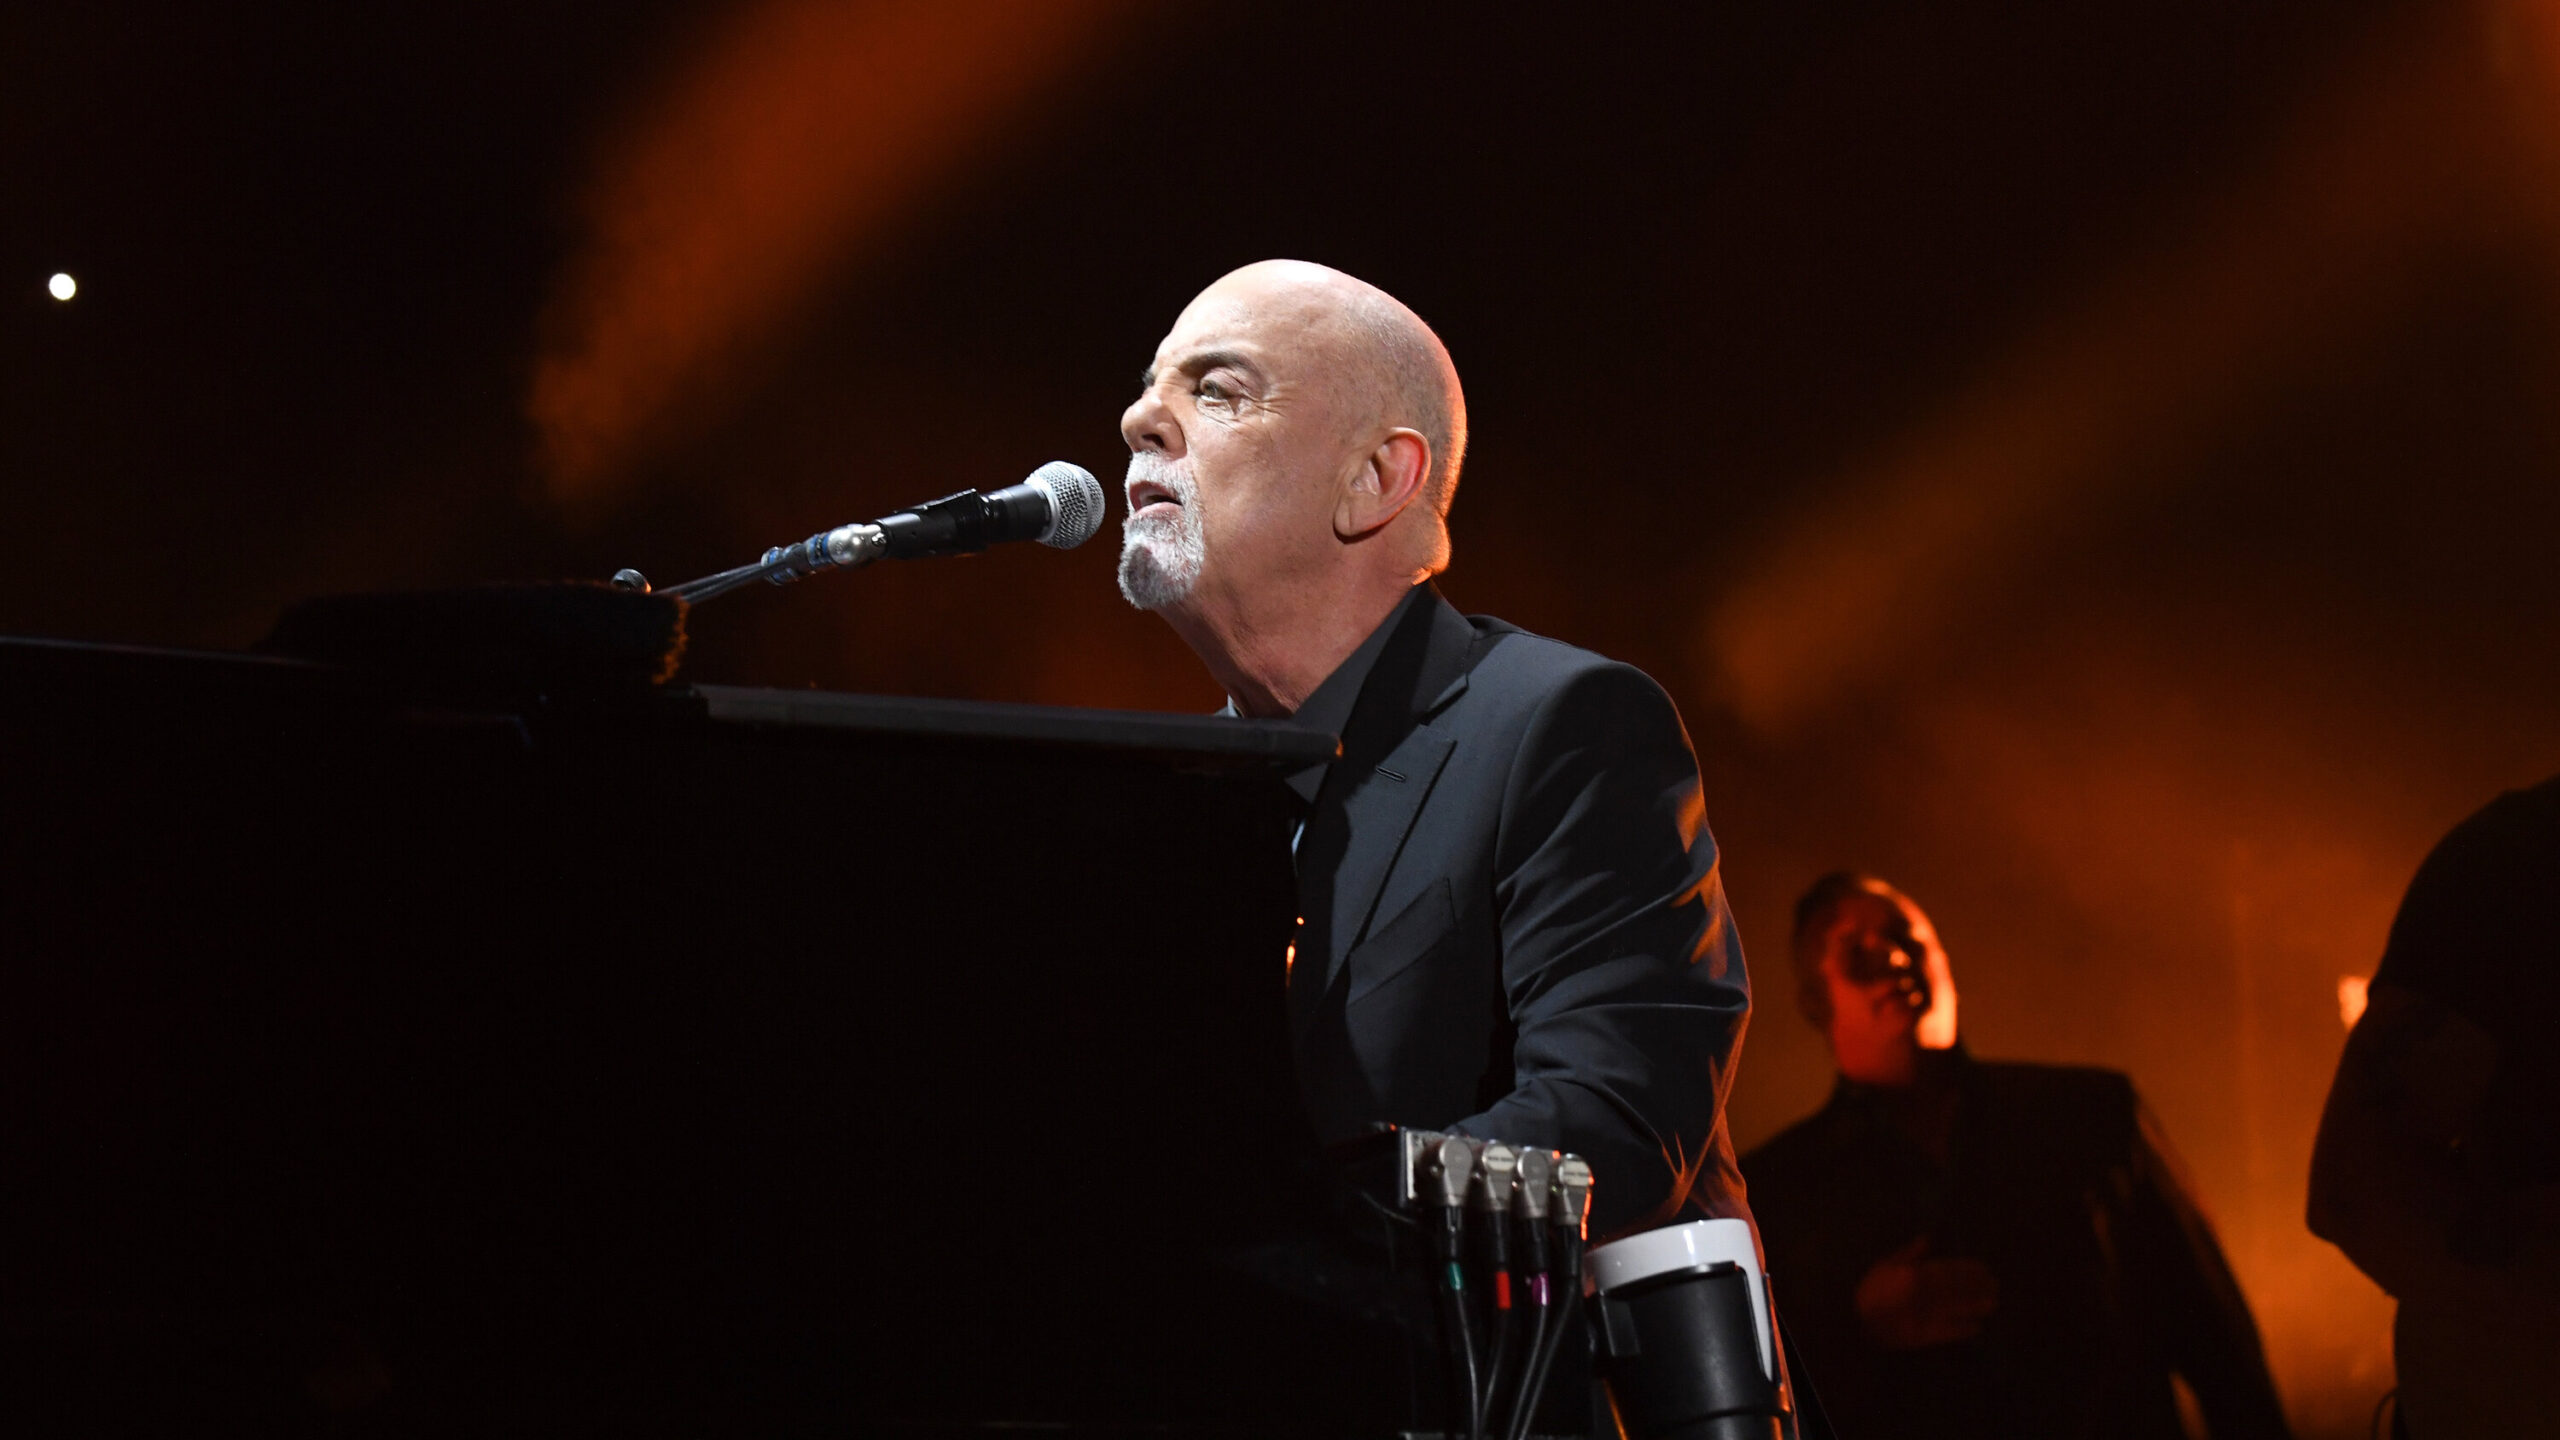 Billy Joel to end record-breaking residency at Madison Square Garden￼